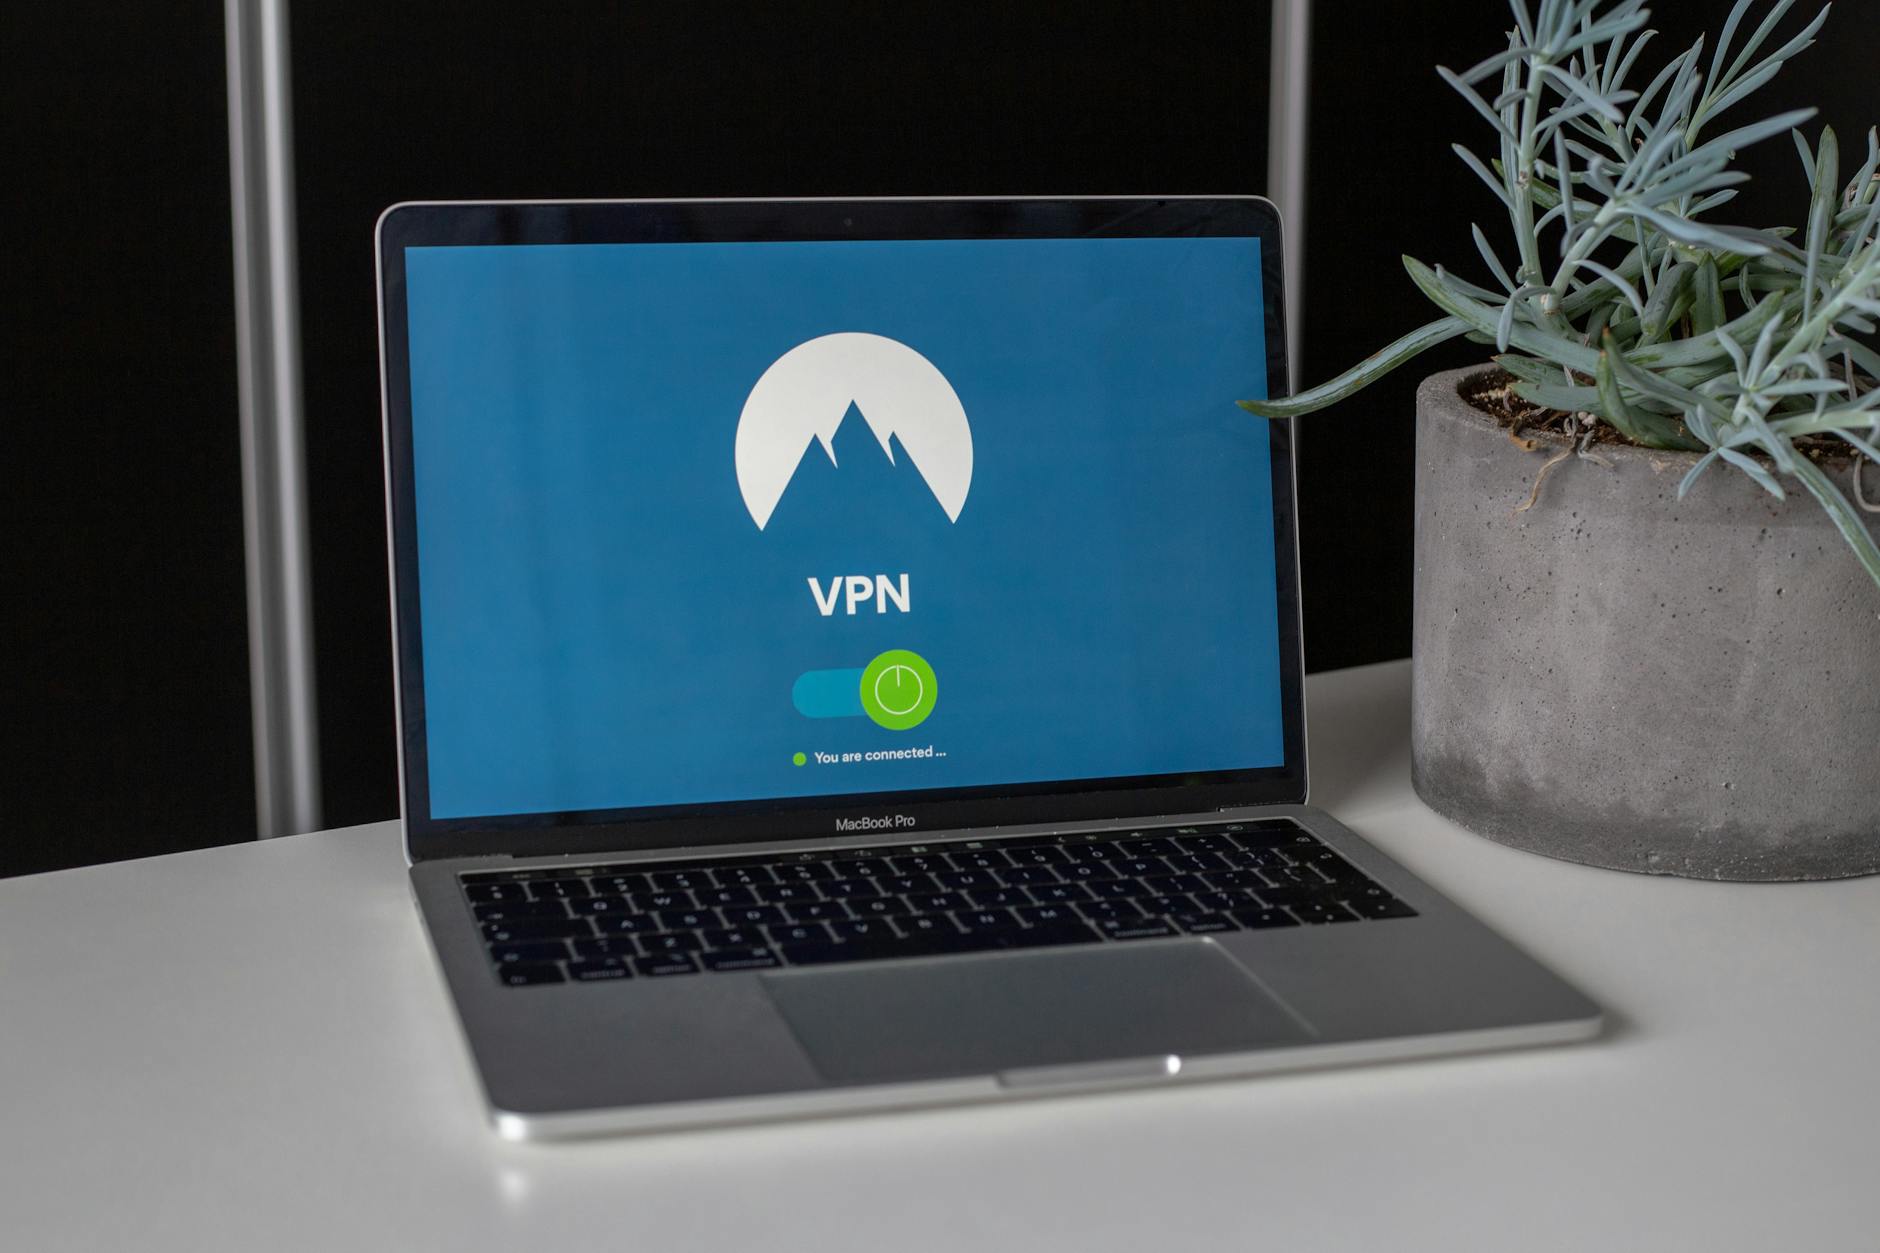  find that your VPN is slow